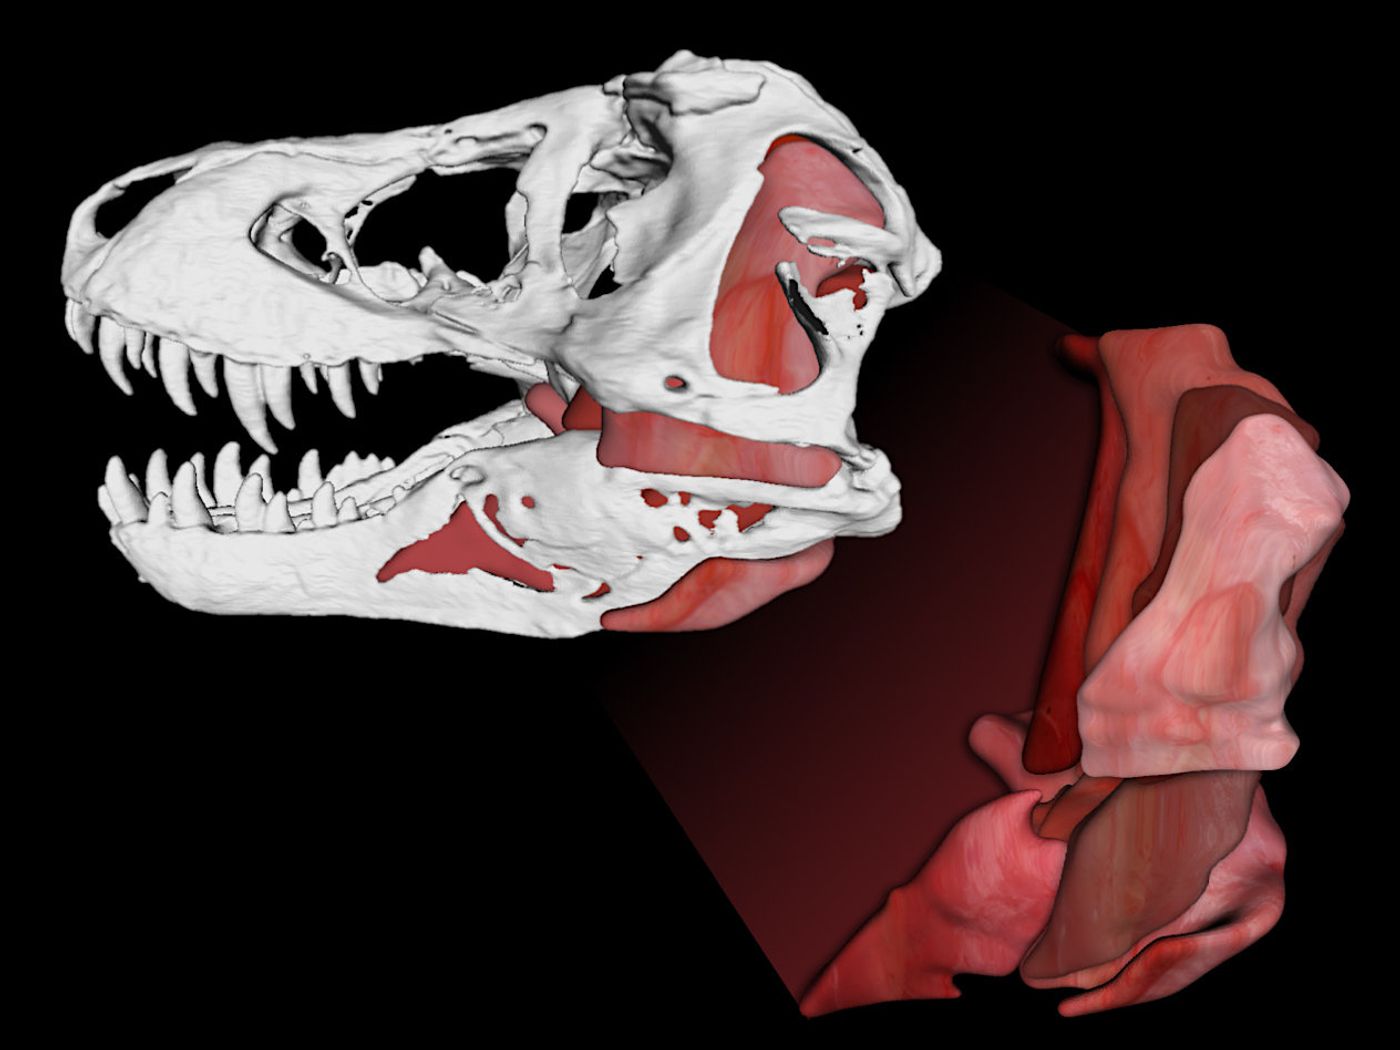 The 3-D computer model showing the T. Rex's powerful jaw muscles and skull.